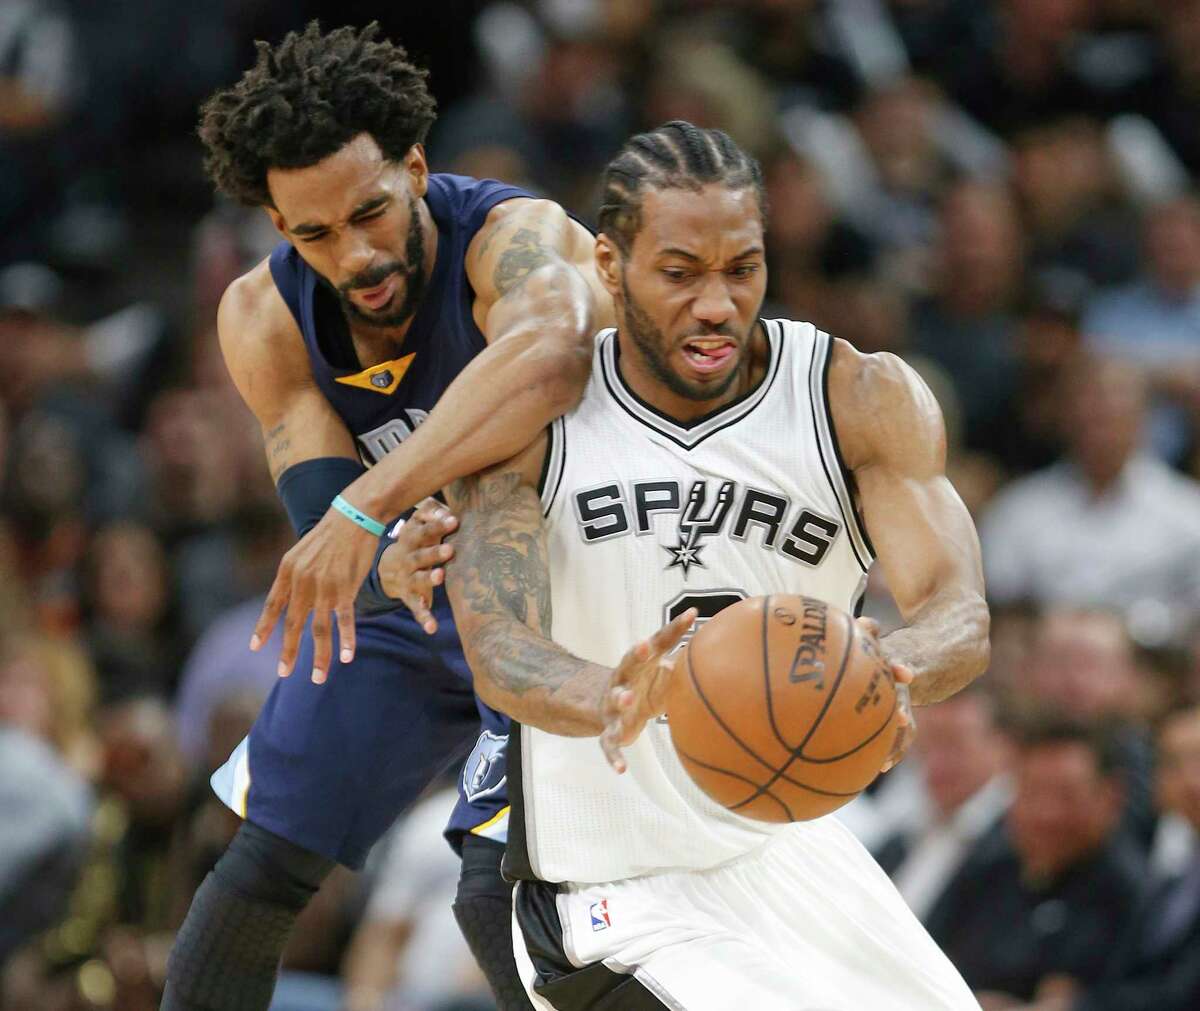 SAN ANTONIO,TX - APRIL 25 : After a steal by Kawhi Leonard #2 of the San Antonio Spurs Mike Conley #11 of the Memphis Grizzlies commits a clear path foul in Game Five of the Western Conference Quarterfinals during the 2017 NBA Playoffs at AT&T Center on April 25, 2017 in San Antonio, Texas. NOTE TO USER: User expressly acknowledges and agrees that , by downloading and or using this photograph, User is consenting to the terms and conditions of the Getty Images License Agreement.